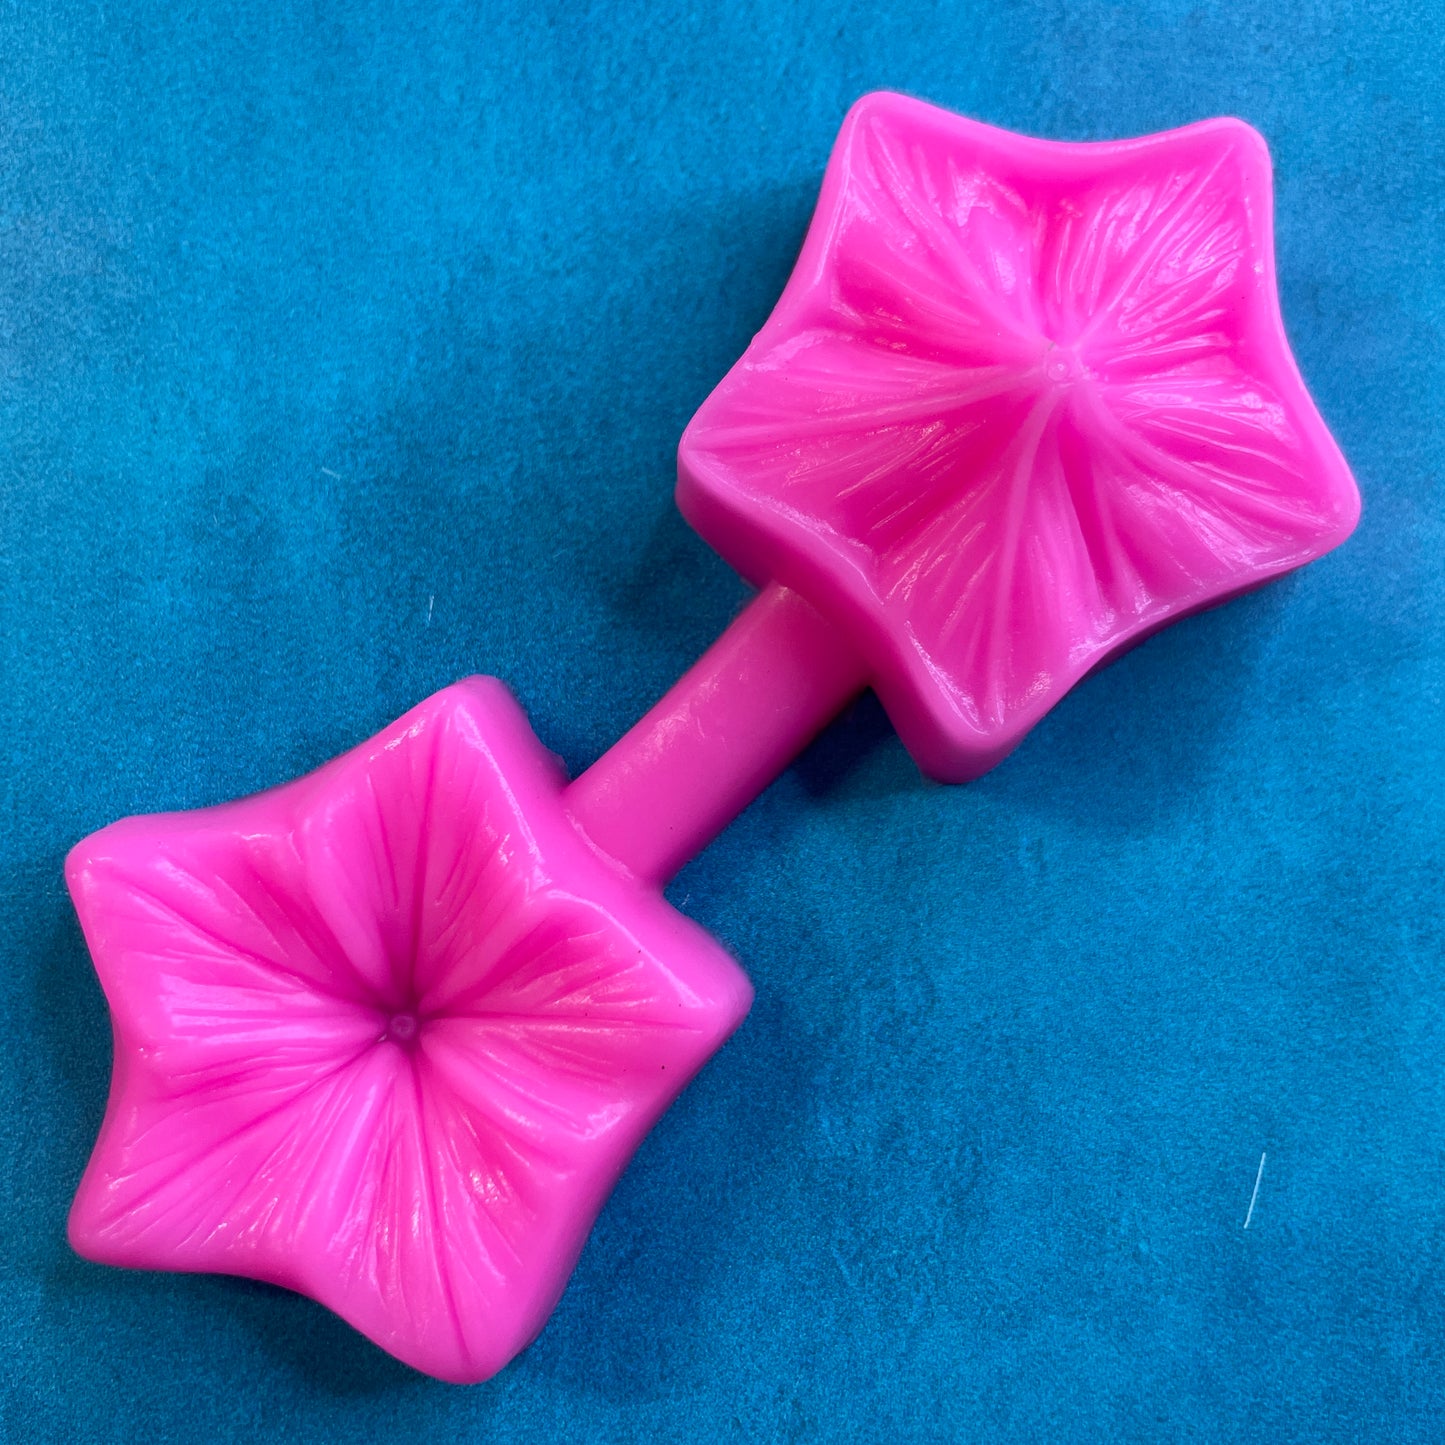 Small Pointed Petal Flower press mold | silicone polymer clay and food safe mold